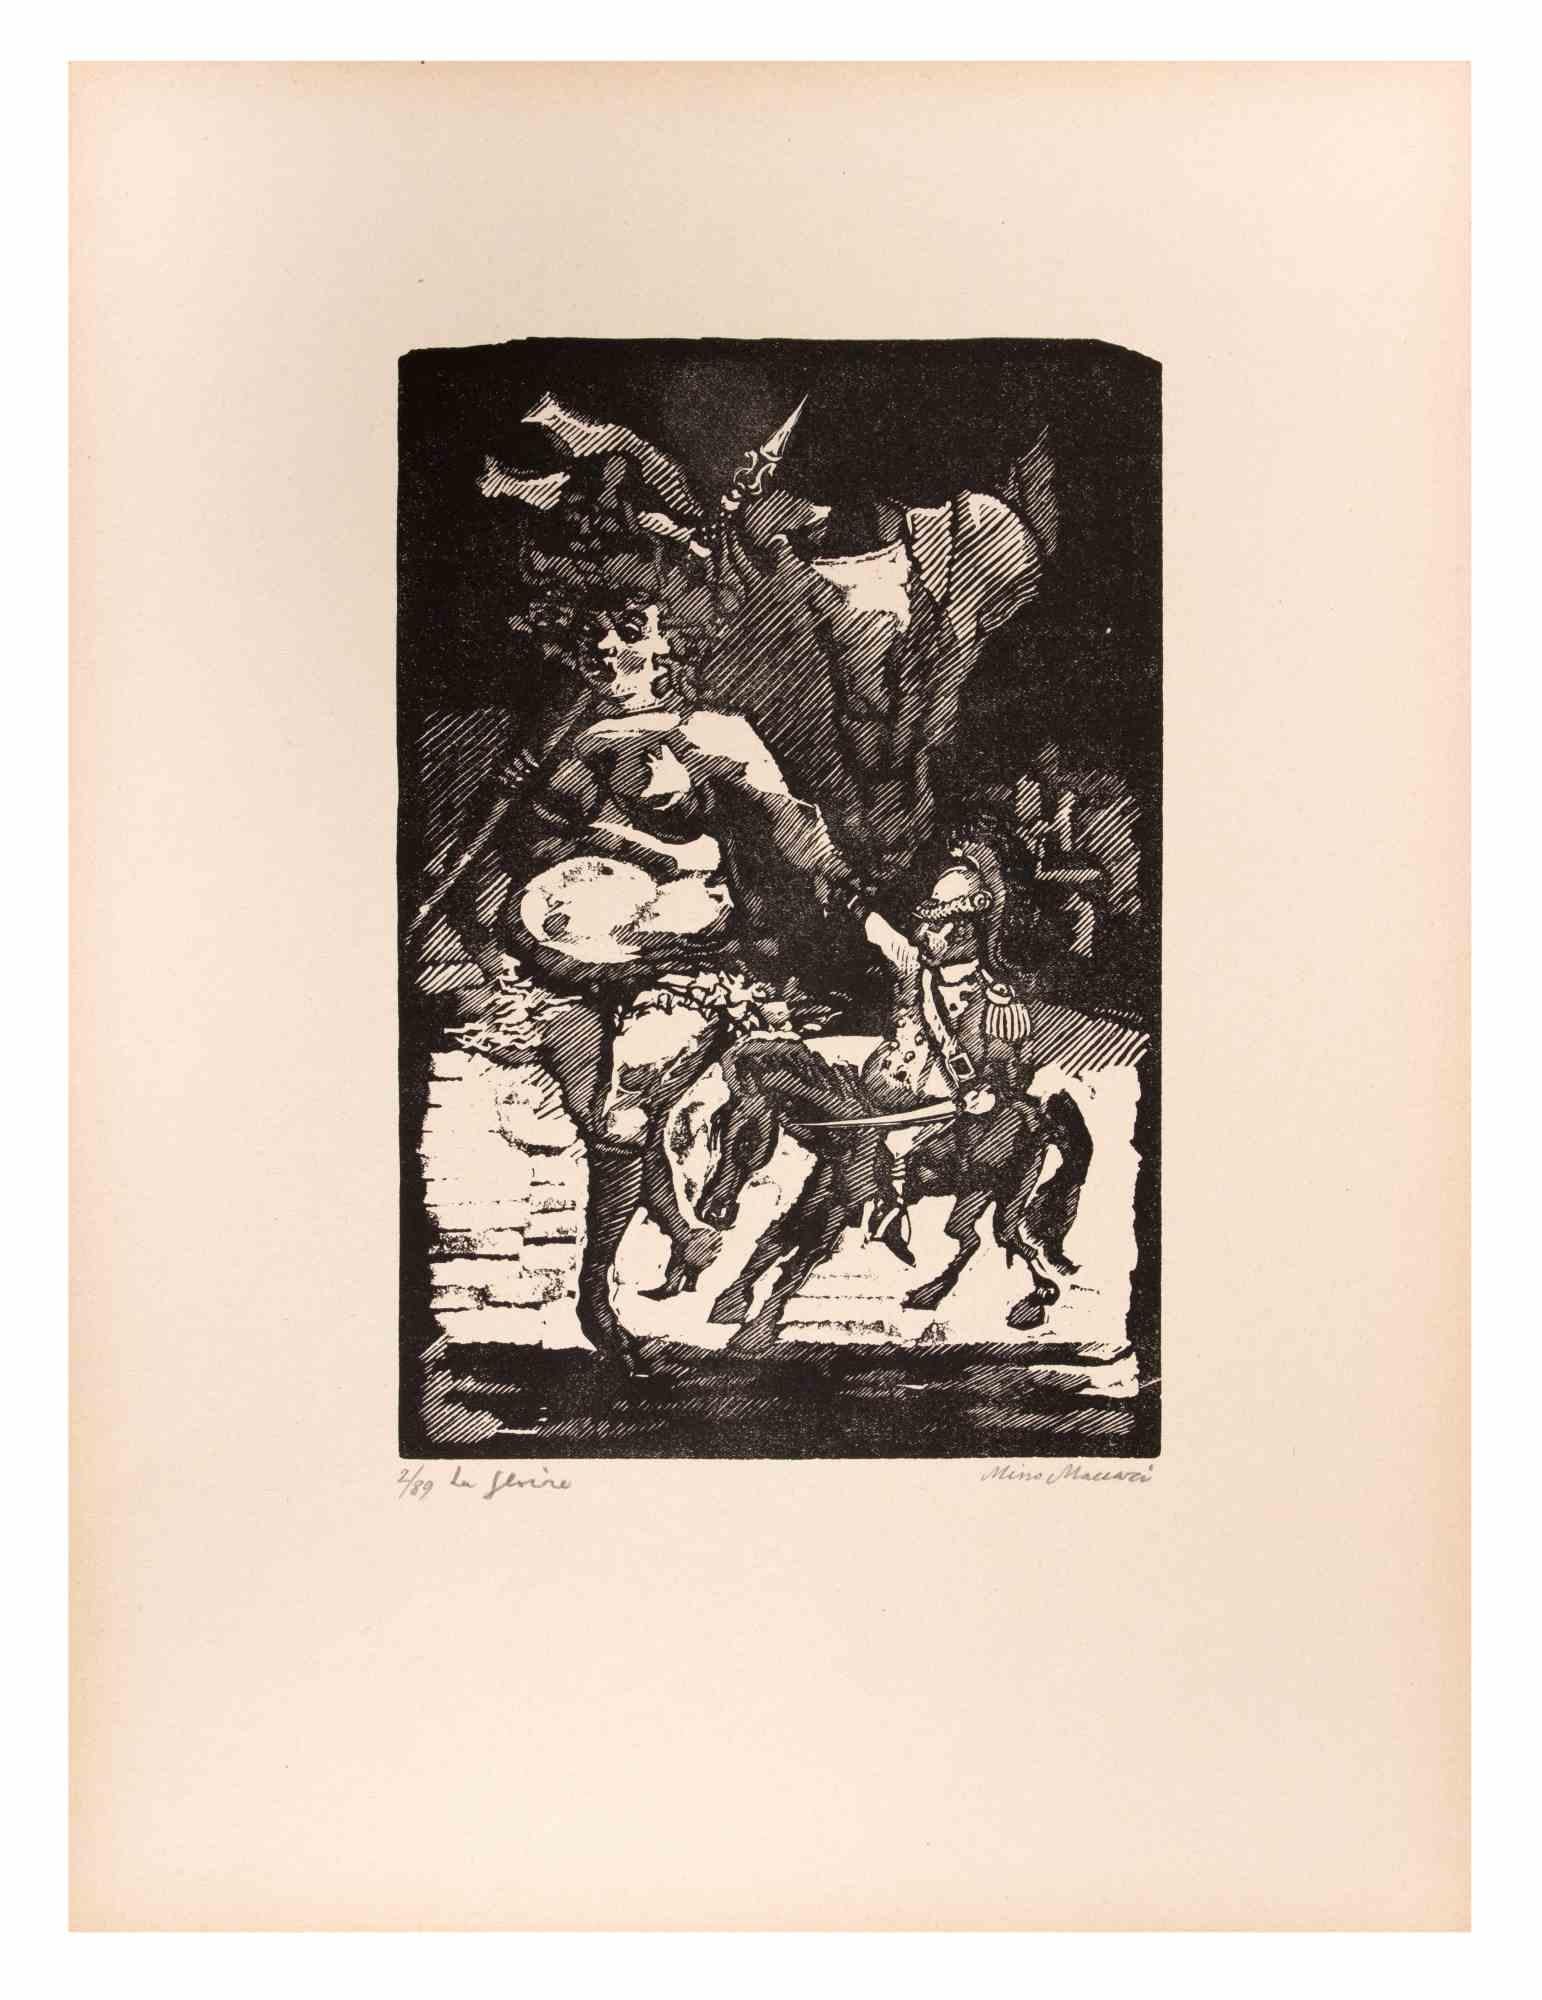 The Fame is an Artwork realized by Mino Maccari  (1924-1989) in the Mid-20th Century.

B./W. Woodcut on paper. Hand-signed on the lower, numbered 2/89 specimens and titled on the left margin.

Good conditions.

Mino Maccari (Siena, 1924-Rome, June